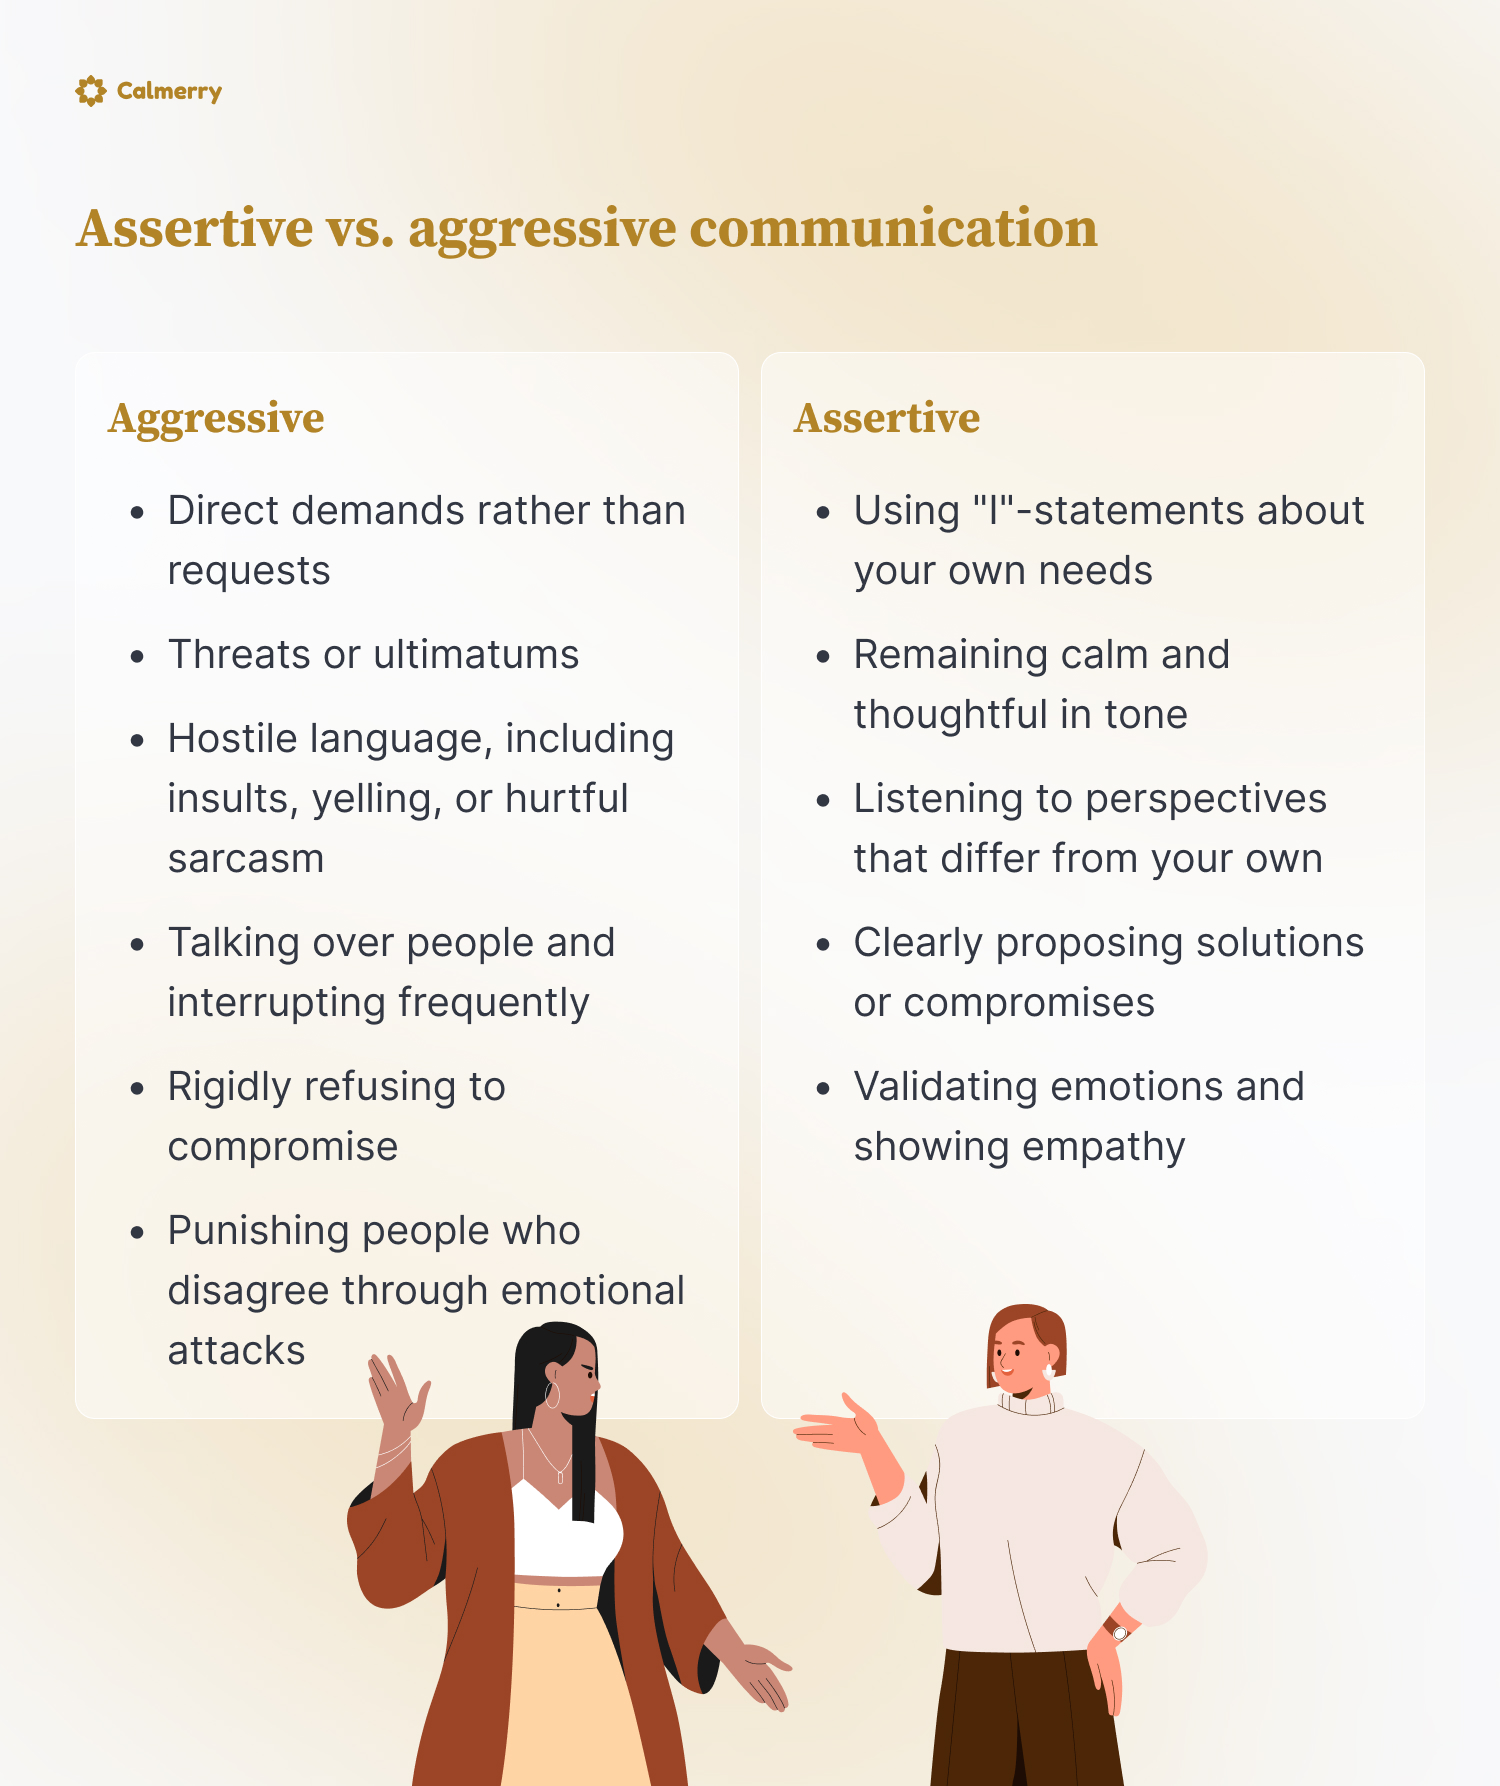 Assertive vs. aggressive communication   Aggressive Direct demands rather than requests Threats or ultimatums Hostile language, including insults, yelling, or hurtful sarcasm Talking over people and interrupting frequently Rigidly refusing to compromise Punishing people who disagree through emotional attacks   Assertive Using "I"-statements about your own needs Remaining calm and thoughtful in tone Listening to perspectives that differ from your own Clearly proposing solutions or compromises Validating emotions and showing empathy